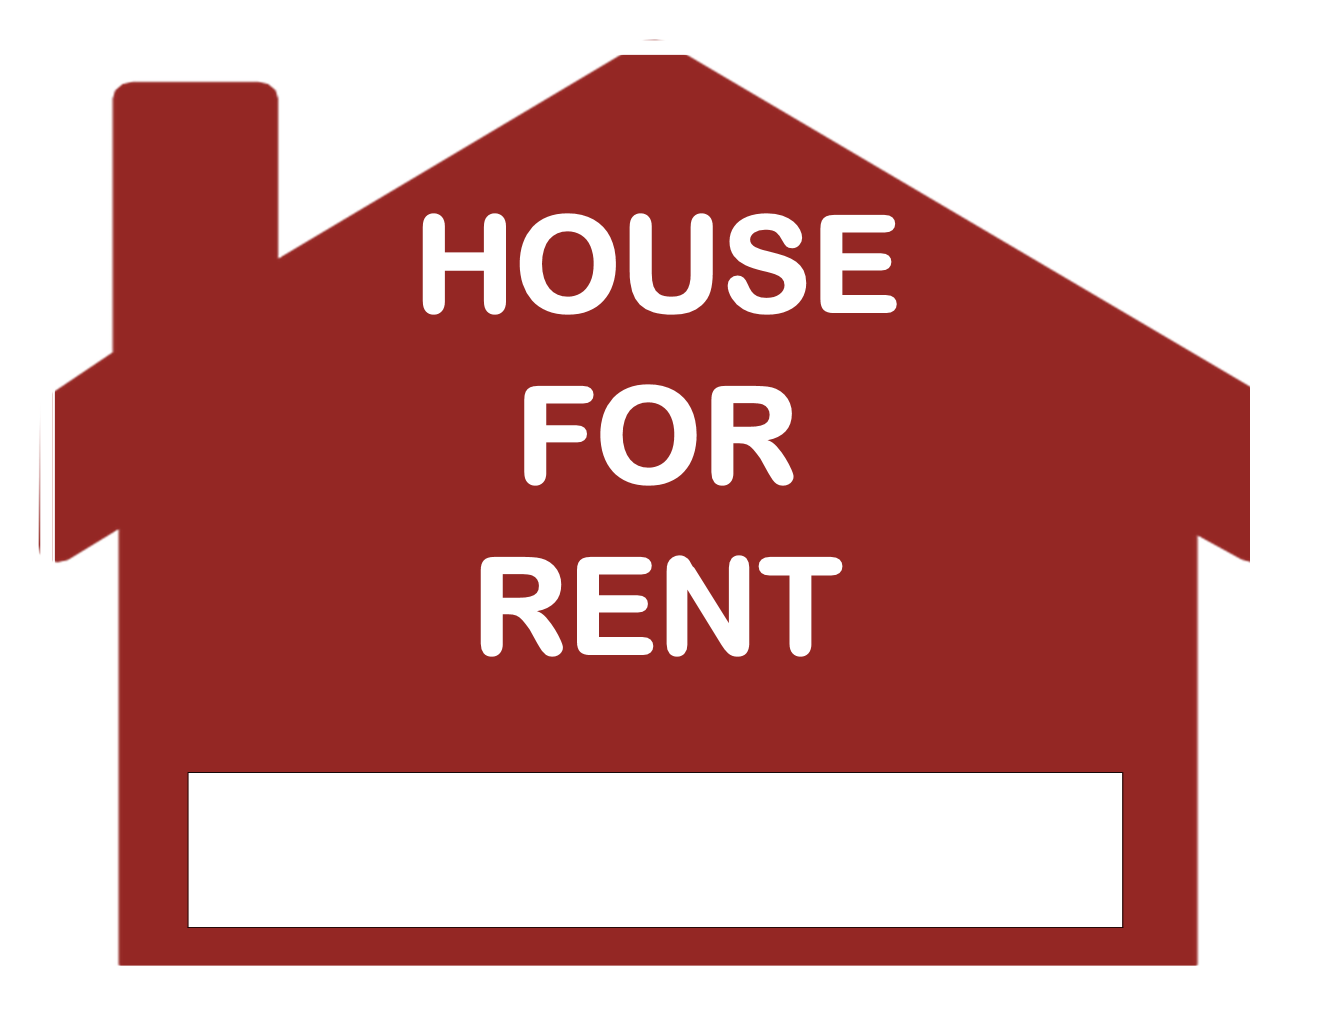 for-rent-sign